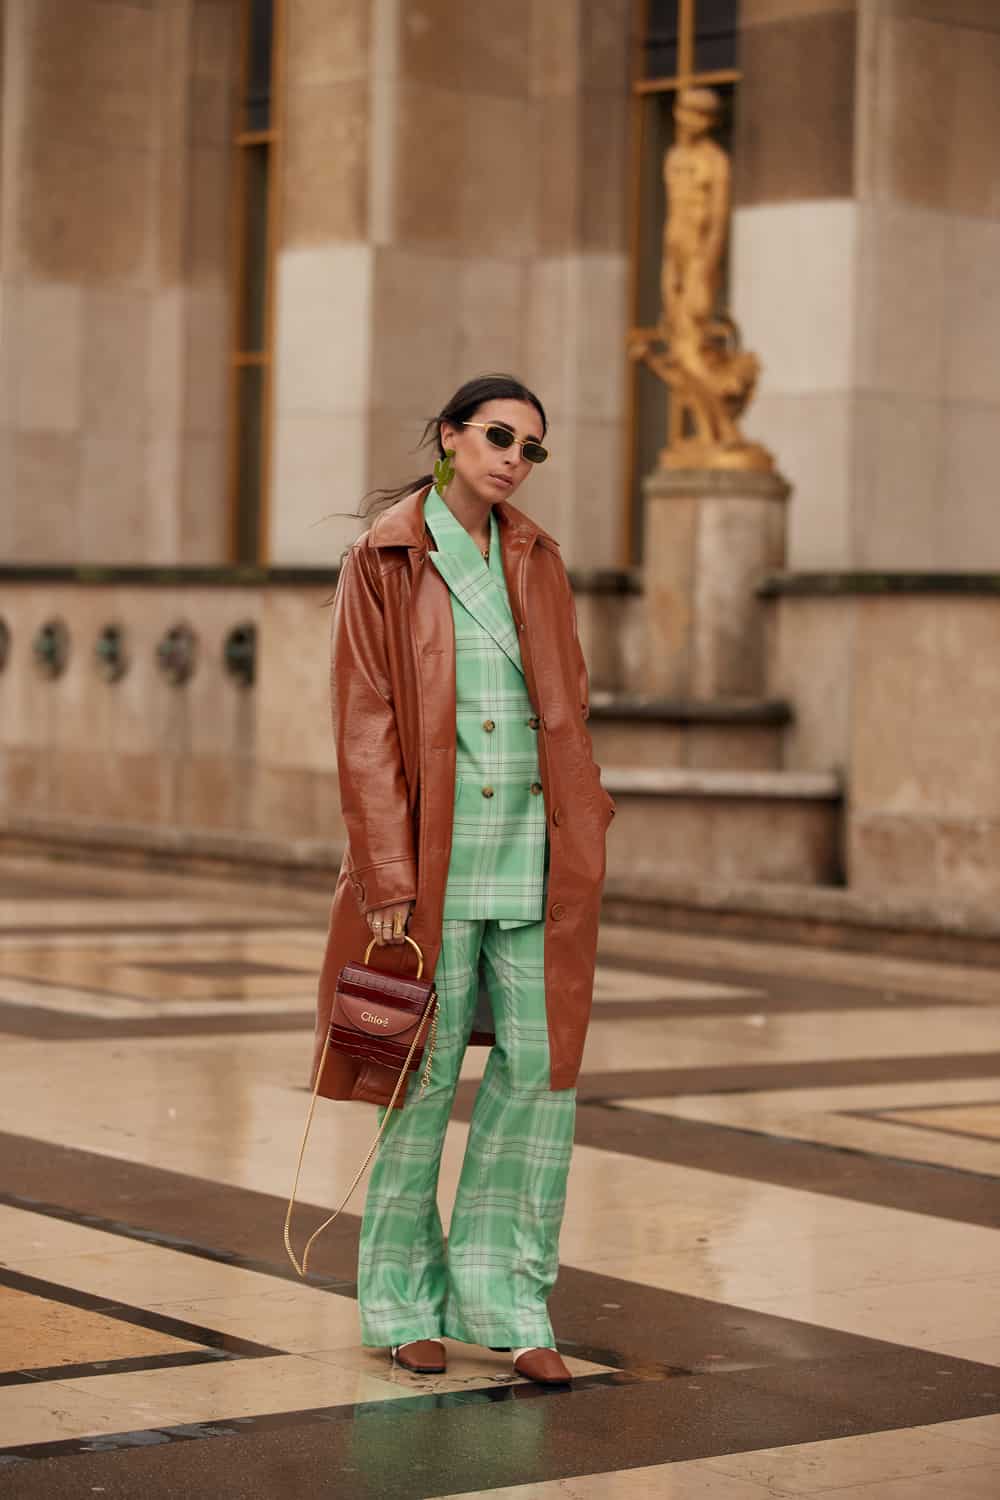 The Best Street Style Looks From Days 3 and 4 of Paris Fashion Week